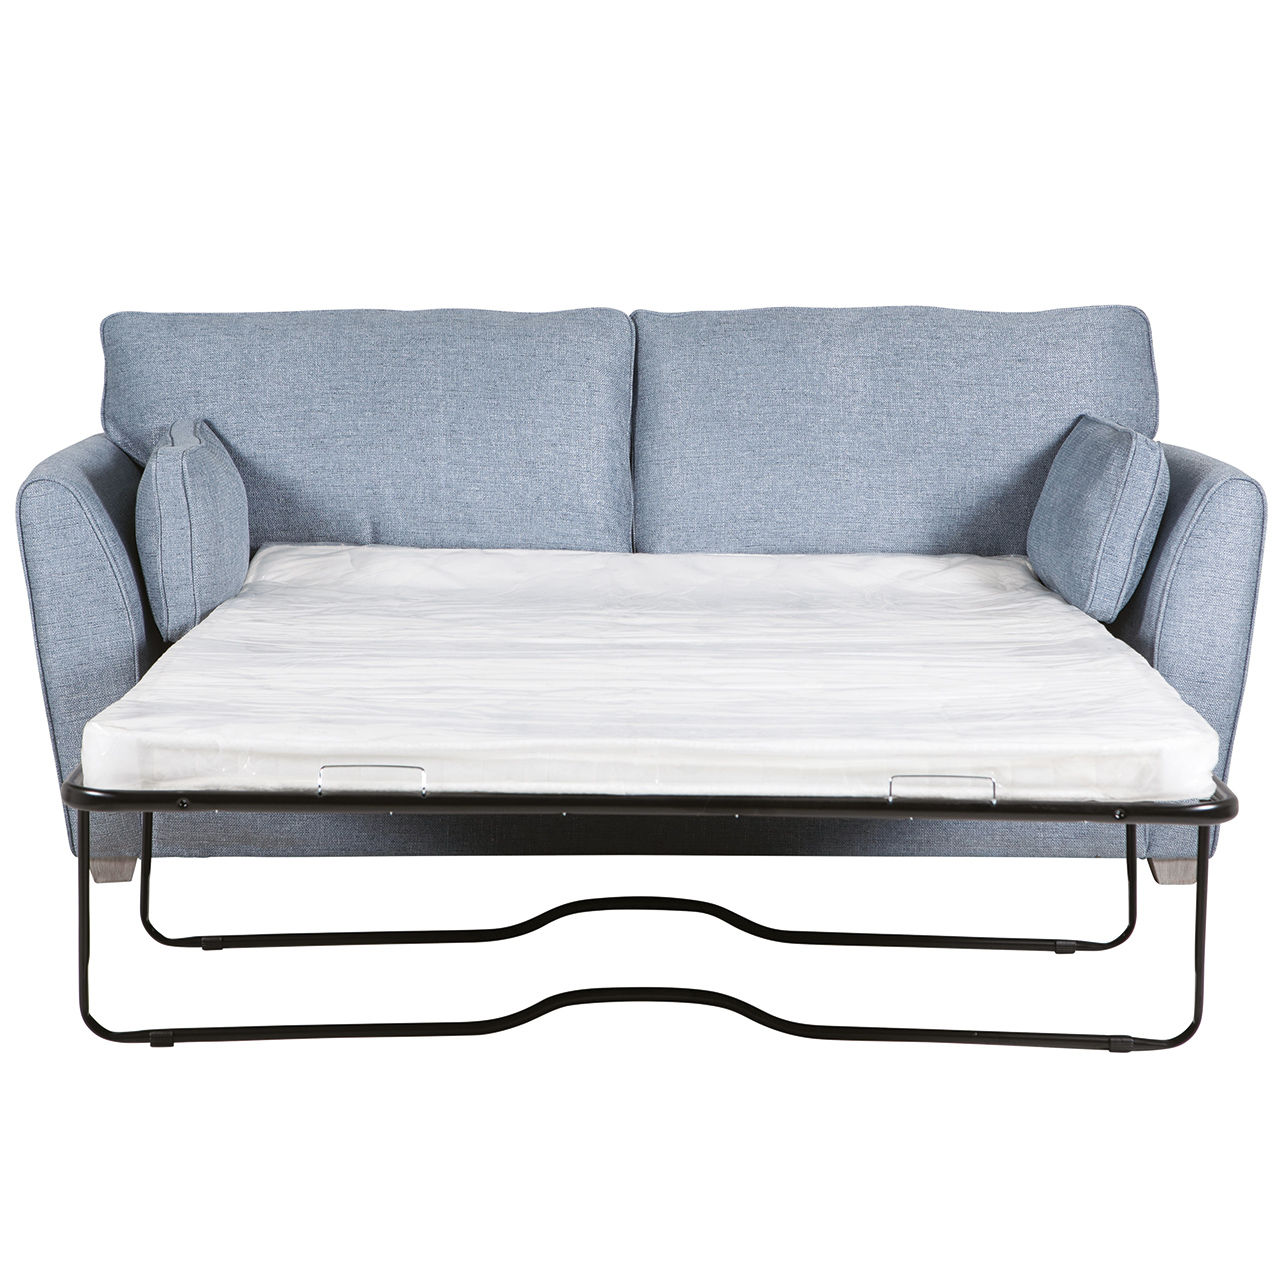 10-Second Sofa Bed